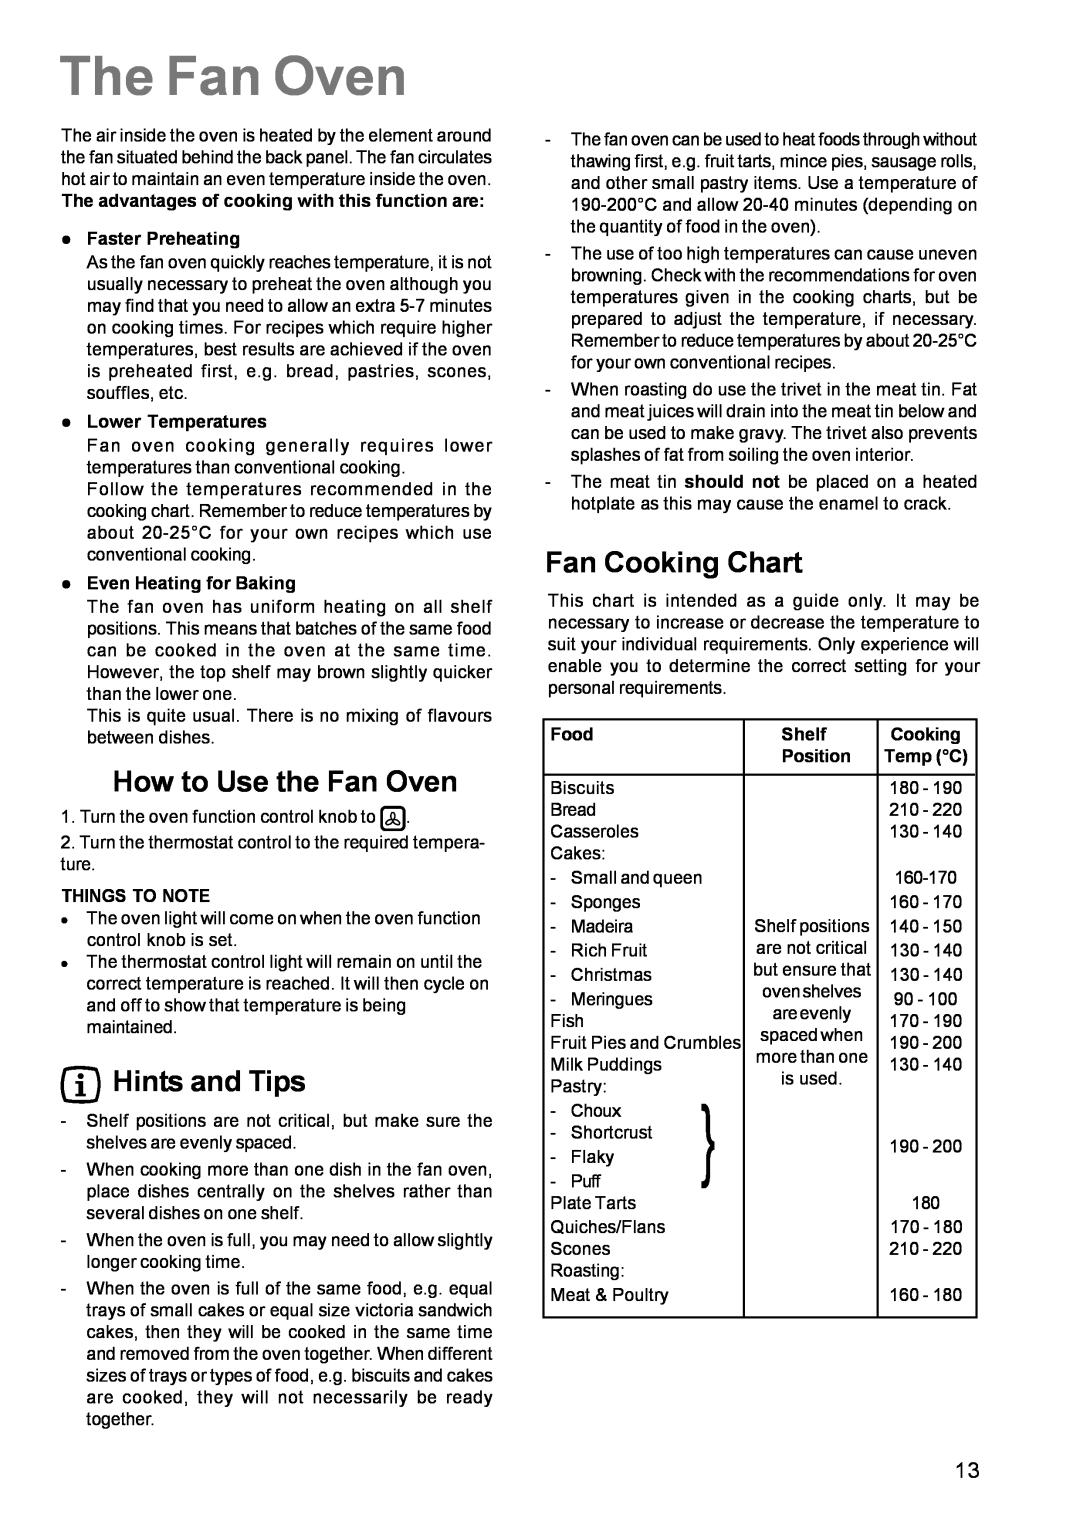 Zanussi ZCE 631 manual The Fan Oven, How to Use the Fan Oven, Fan Cooking Chart, Hints and Tips 